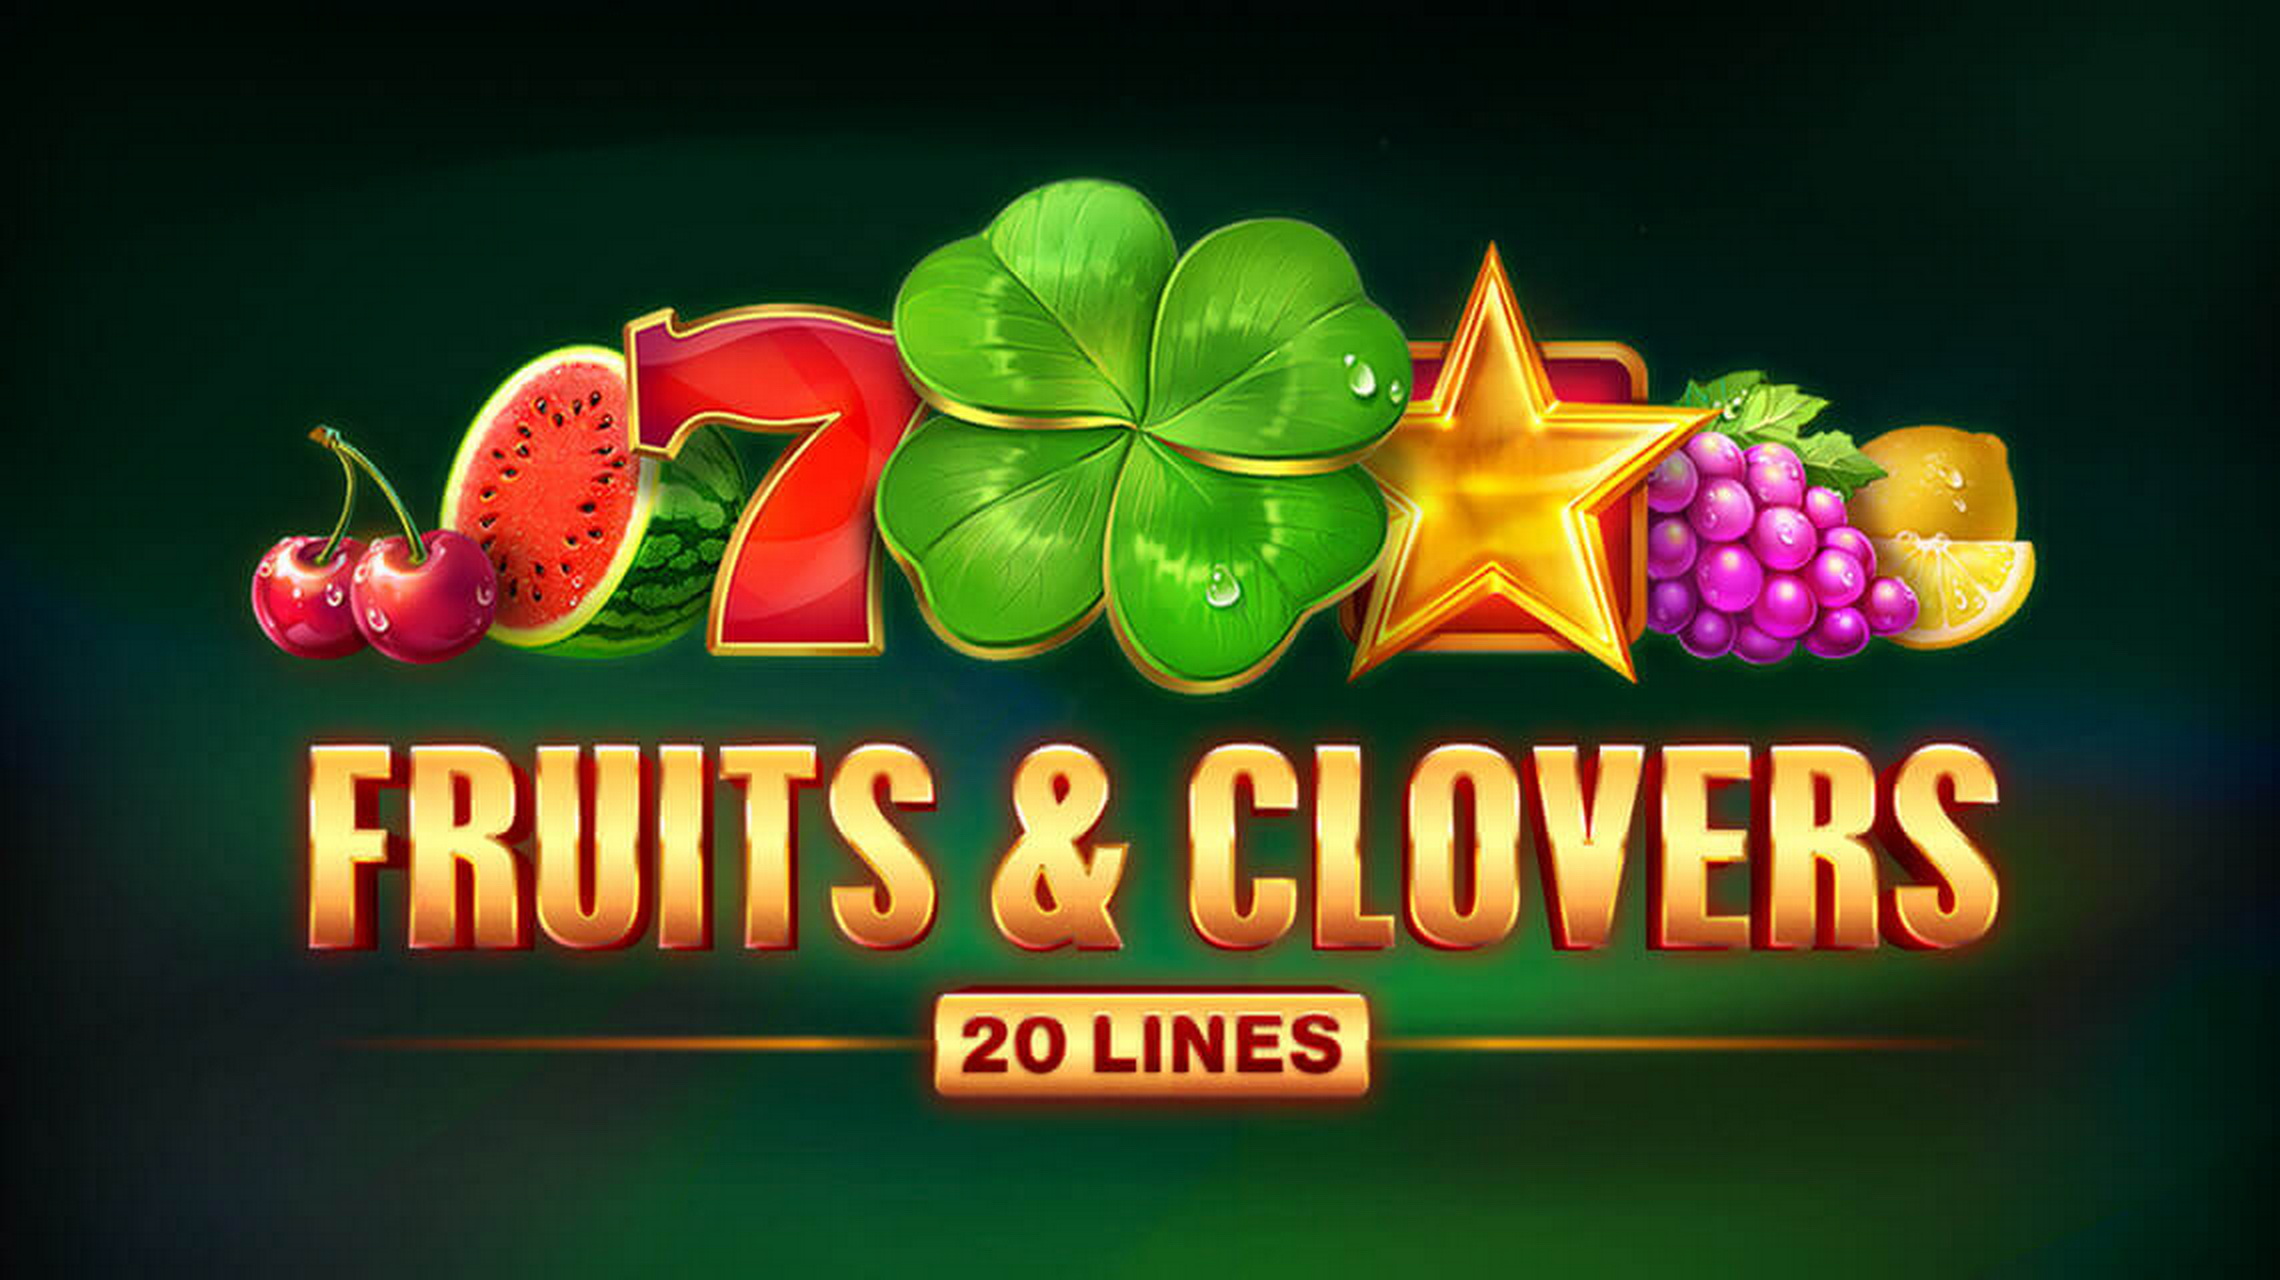 Fruits & Clovers 20 lines demo